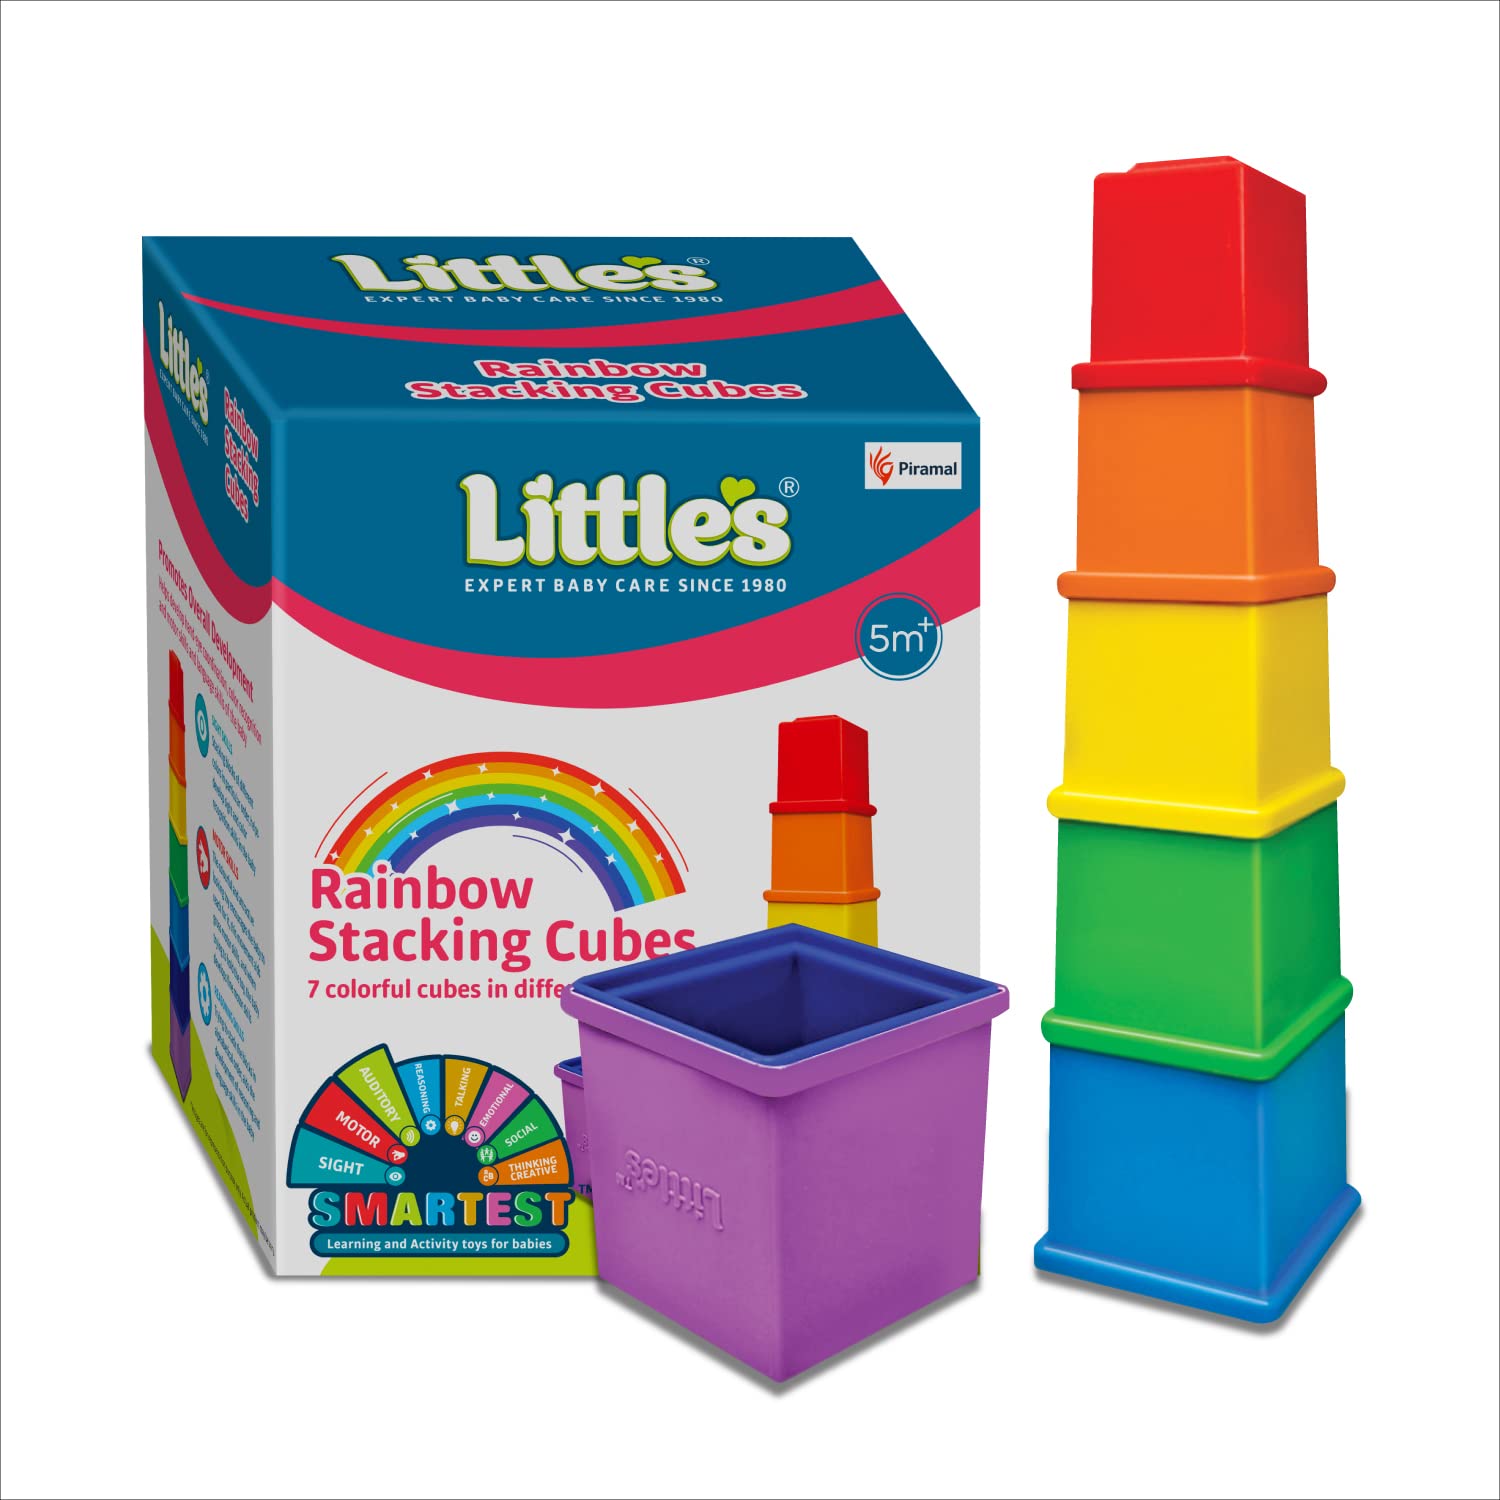 Little's Rainbow Stacking Cubes I Activity toy for babies I Multicolor I Infant & Preschool Toys I Develops motor & Reasoning skills(7 pieces)